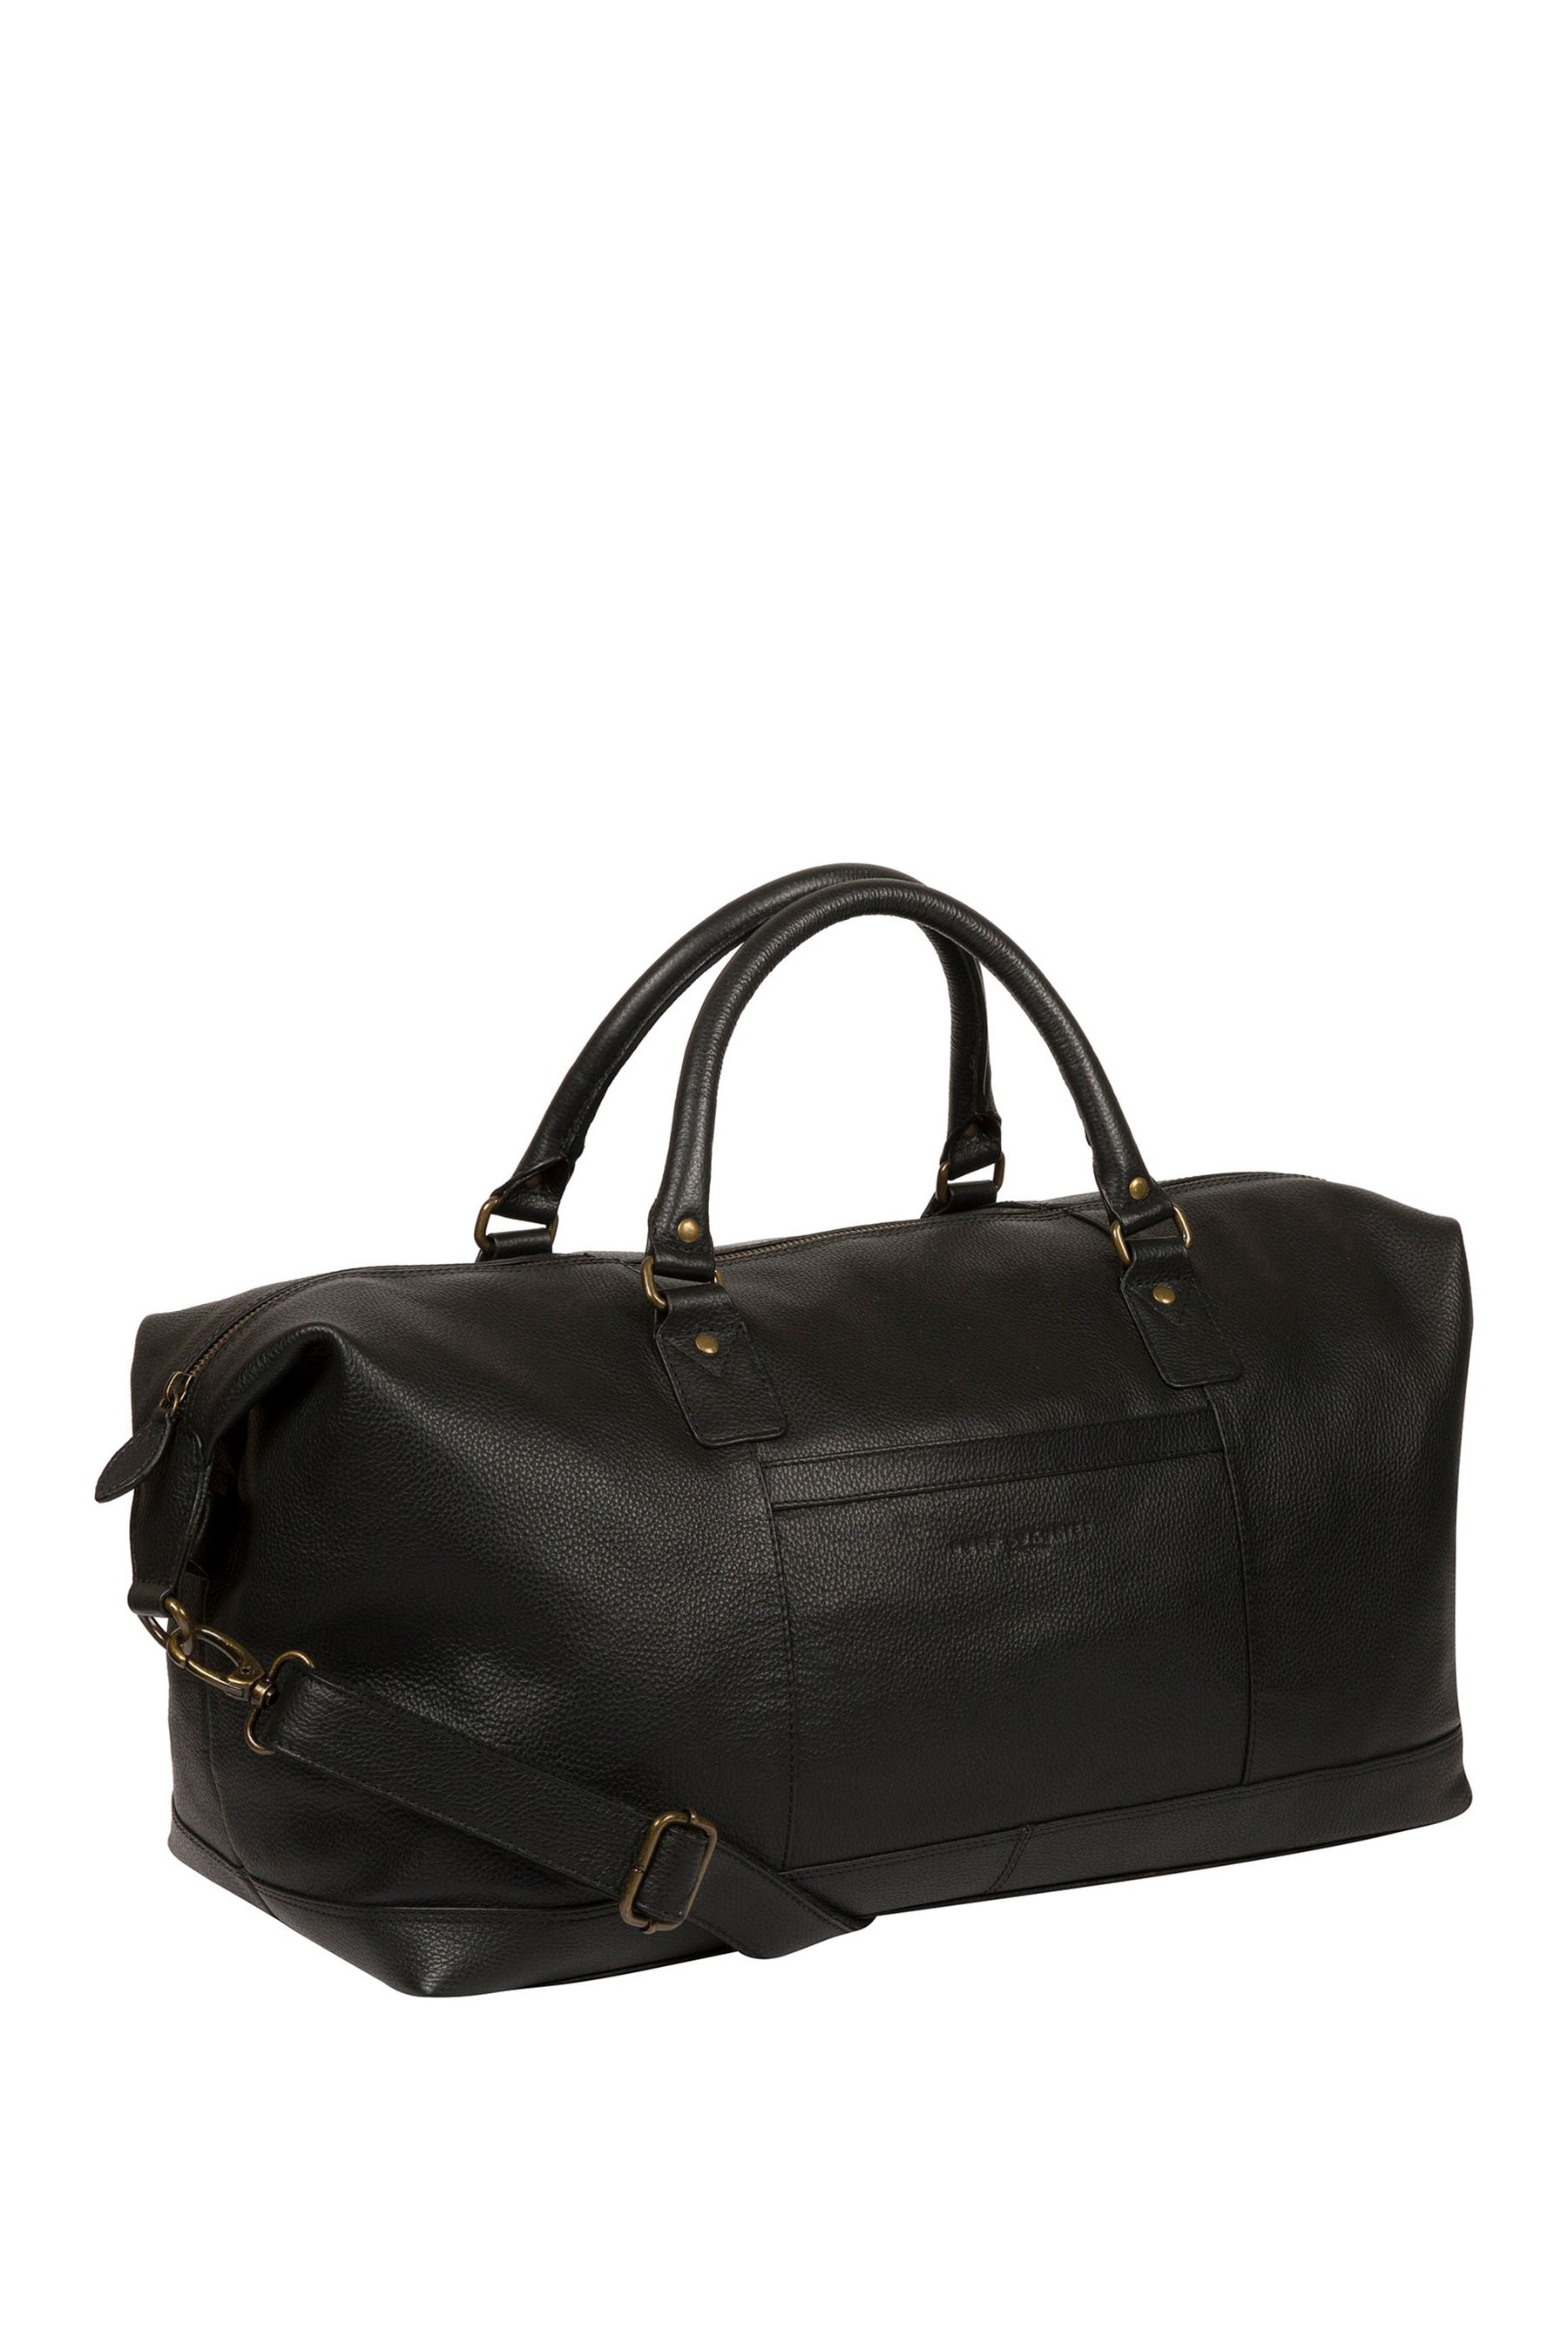 Buy Pure Luxuries London Cargo Leather Holdall from the Next UK online shop